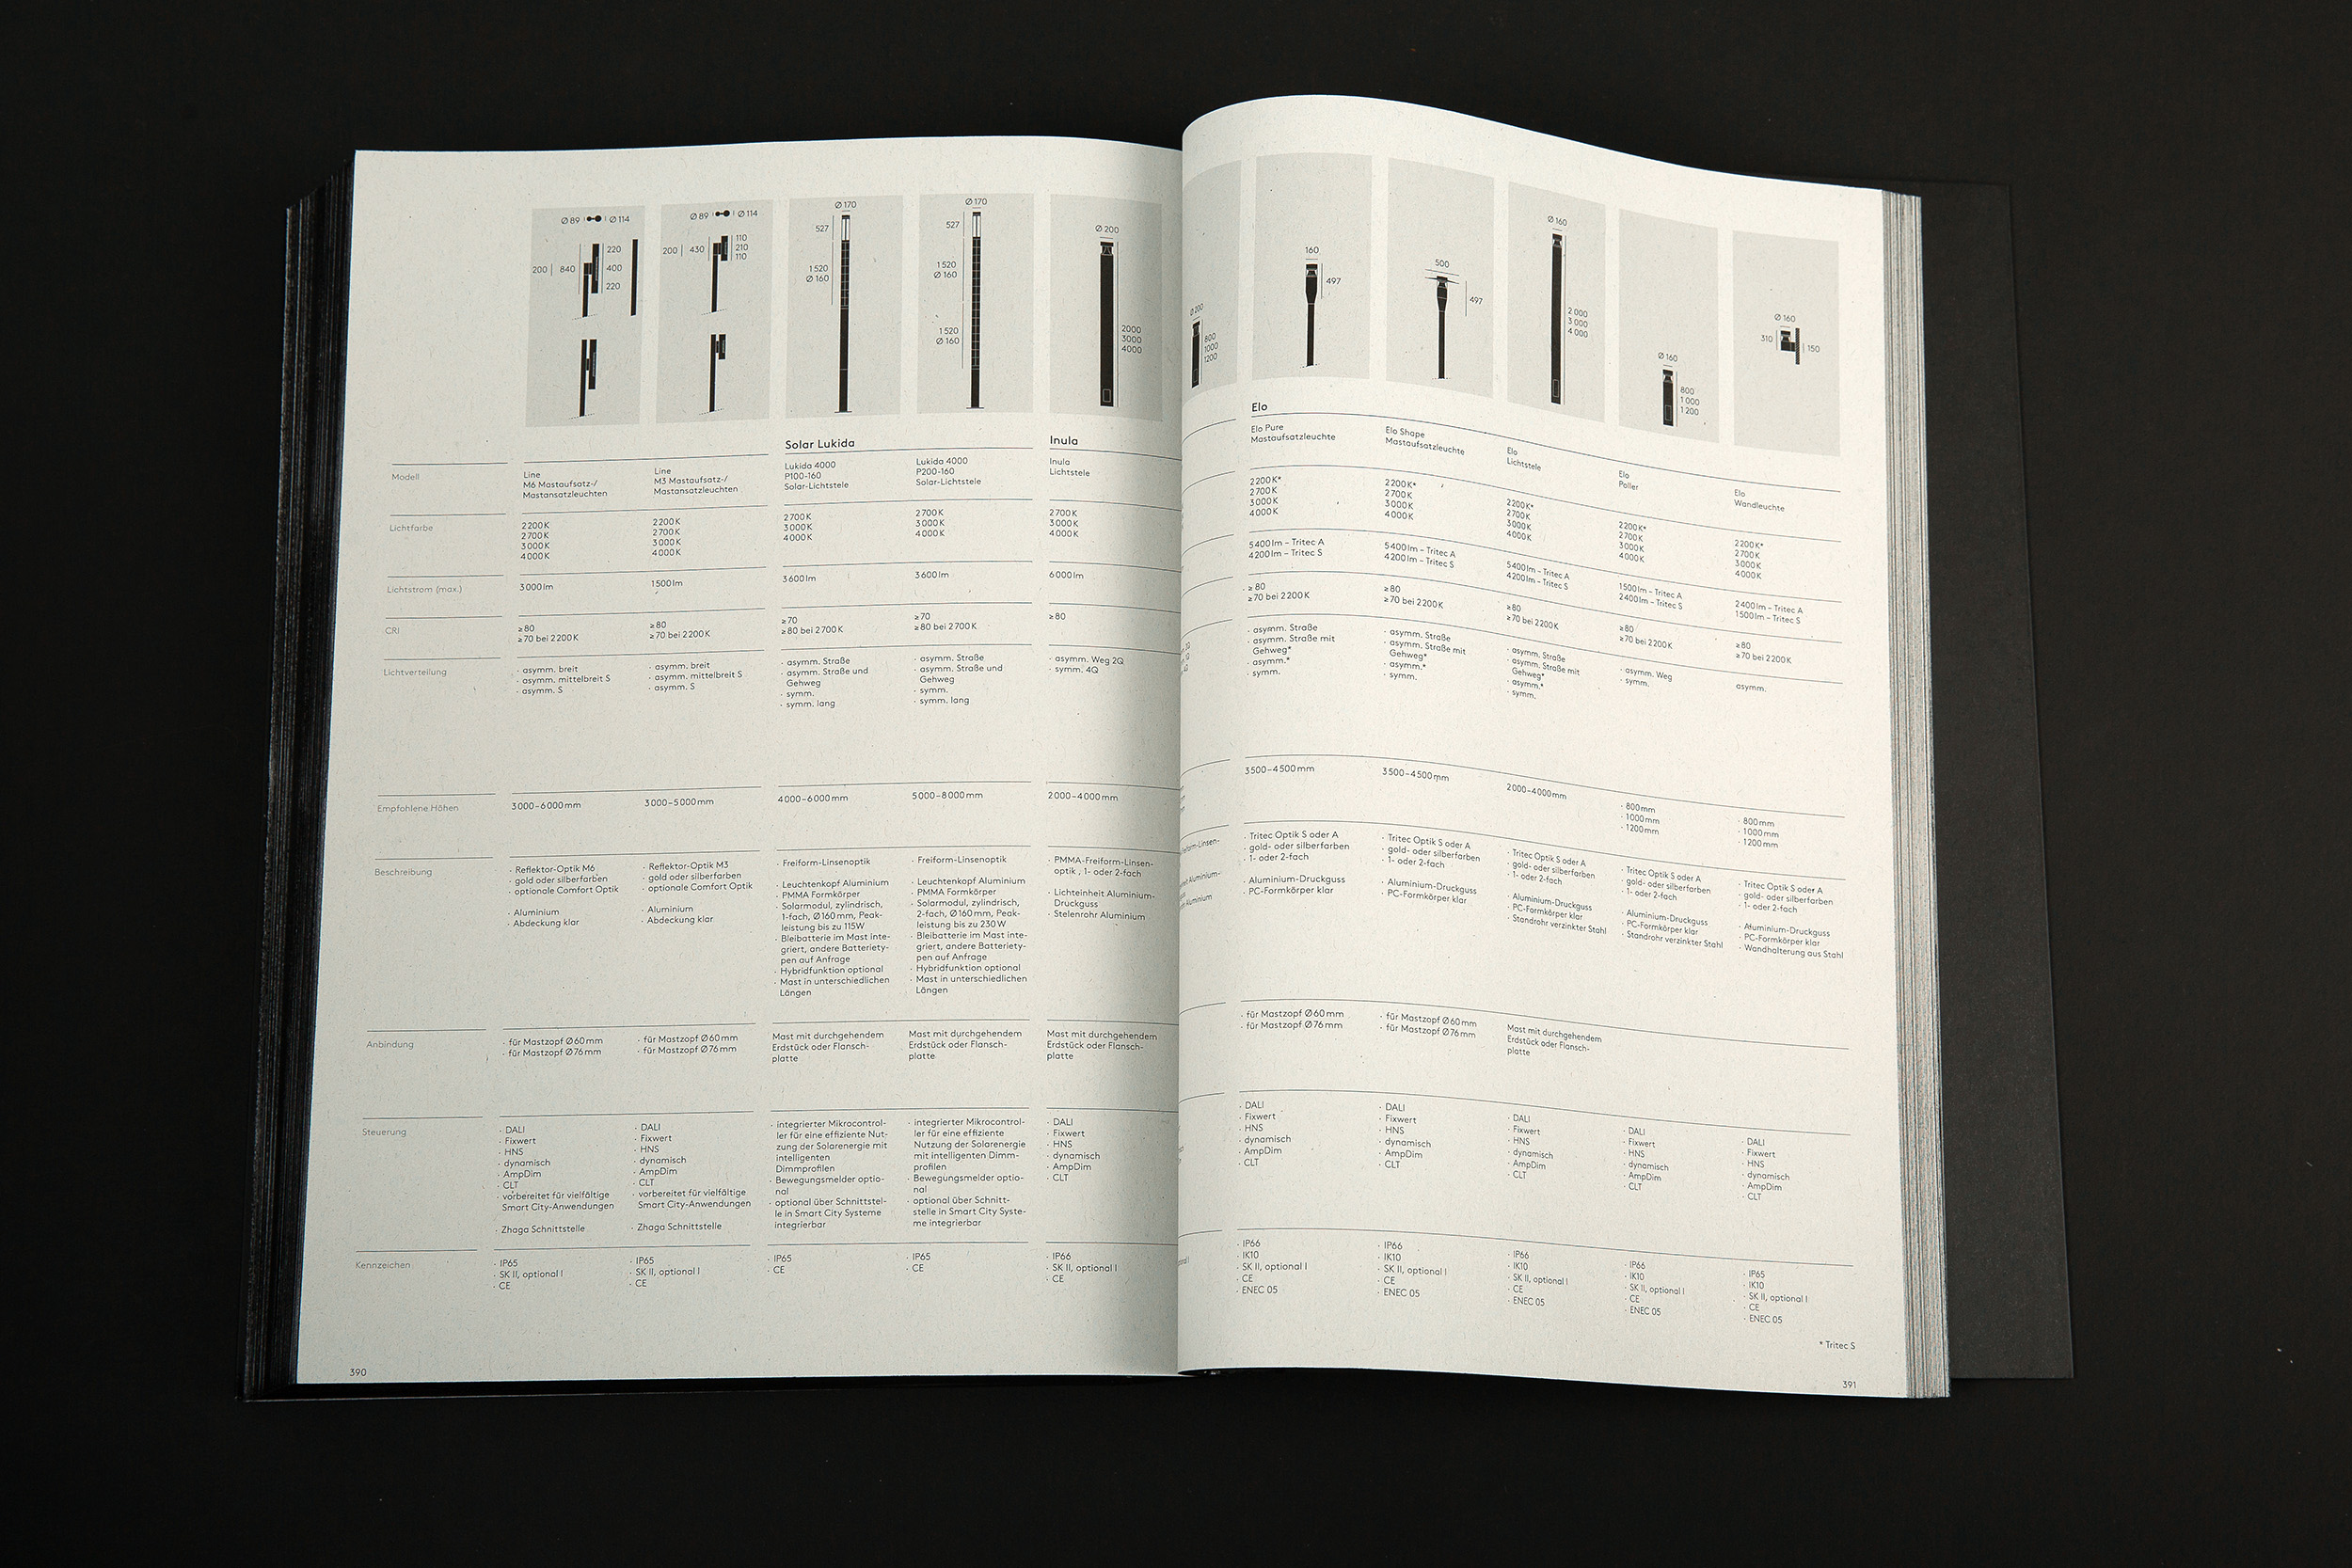 An image of Selux Imagebook, showcasing a double page spread of a table with Technical Information on Luminaires against a grey background.